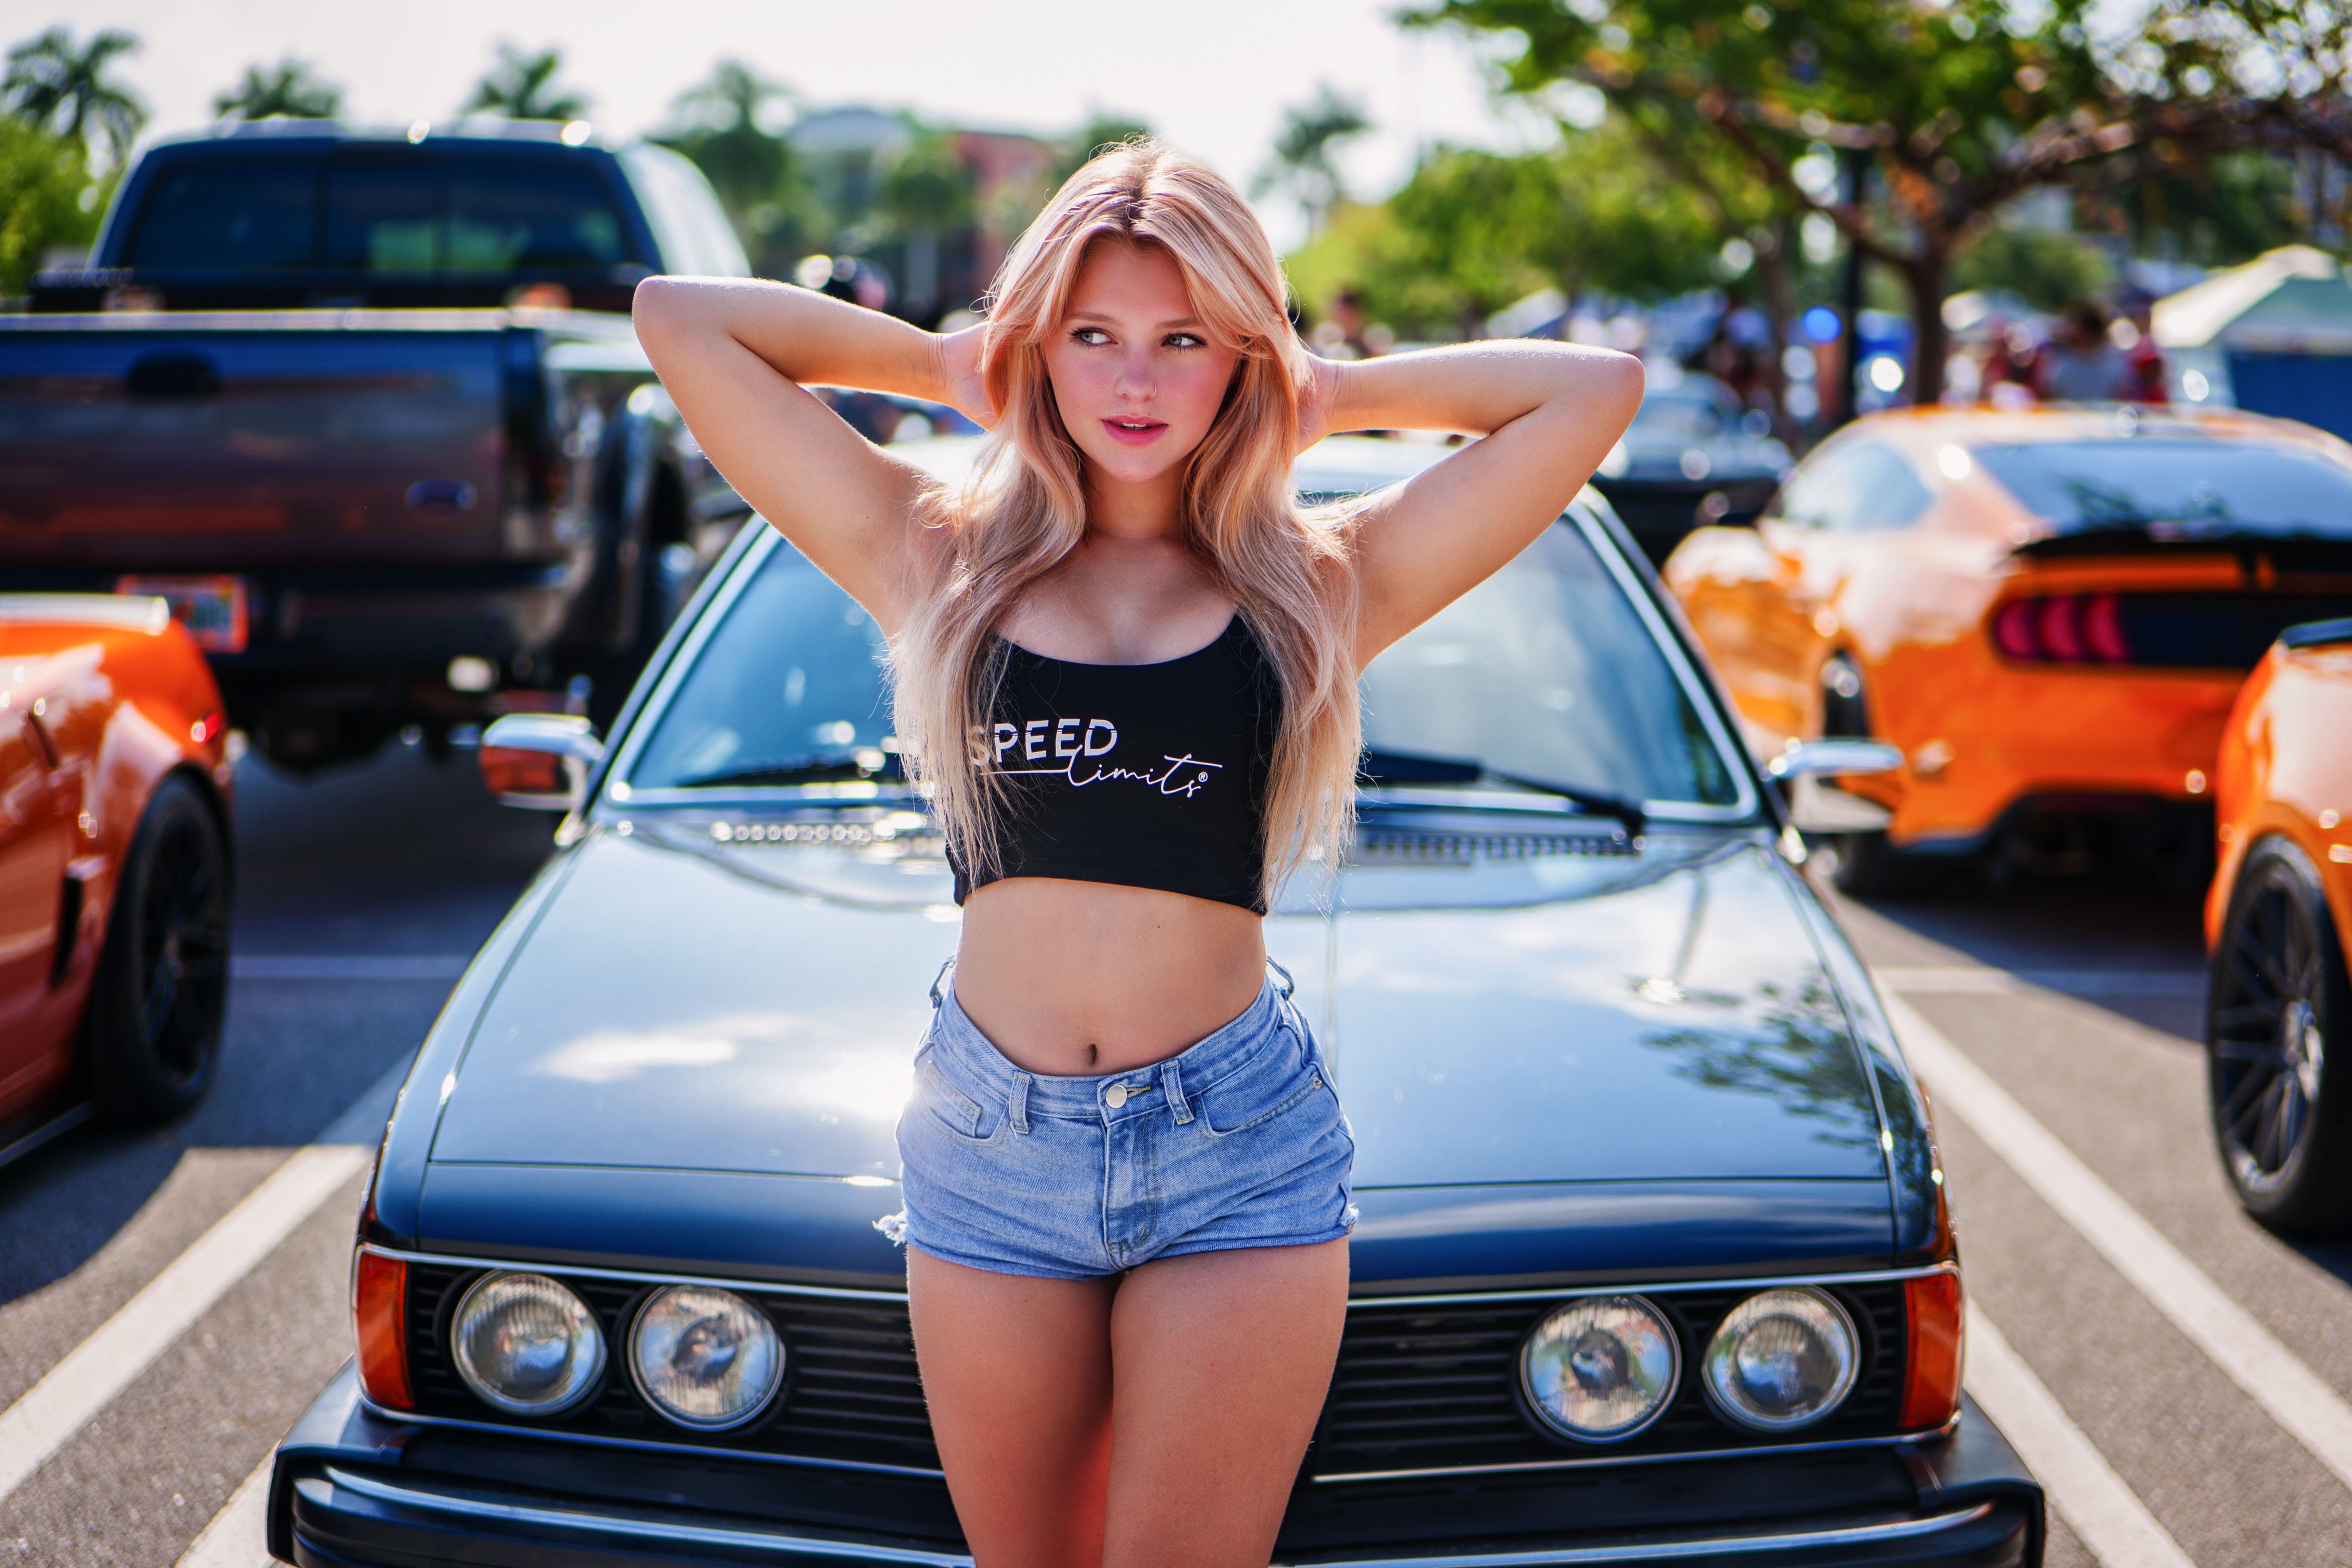 Women Model Blonde Looking Away Parted Lips Nose Rings Crop Top Black Tops Women With Cars Car Depth 5813x3875